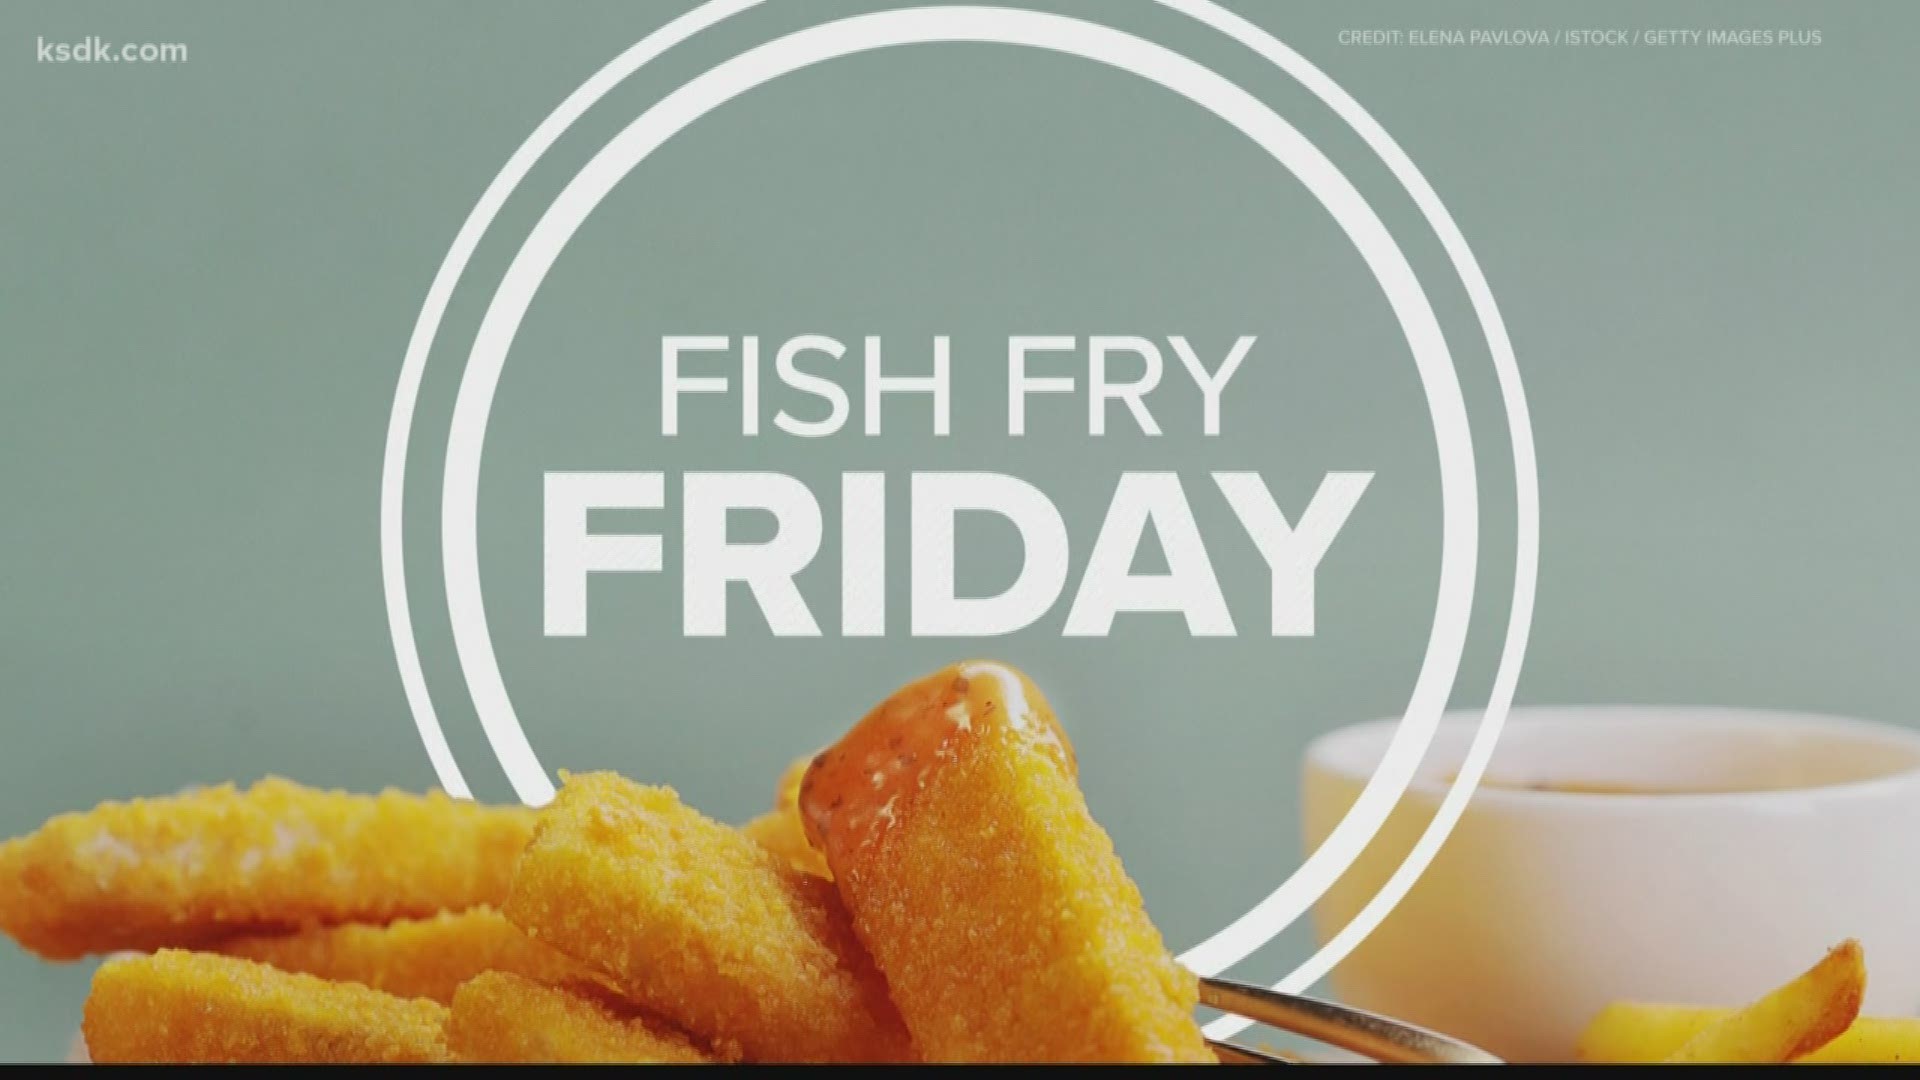 5 On Your Side's Tracy Hinson heads to St. Mary Magdalen to check out their fish fry!